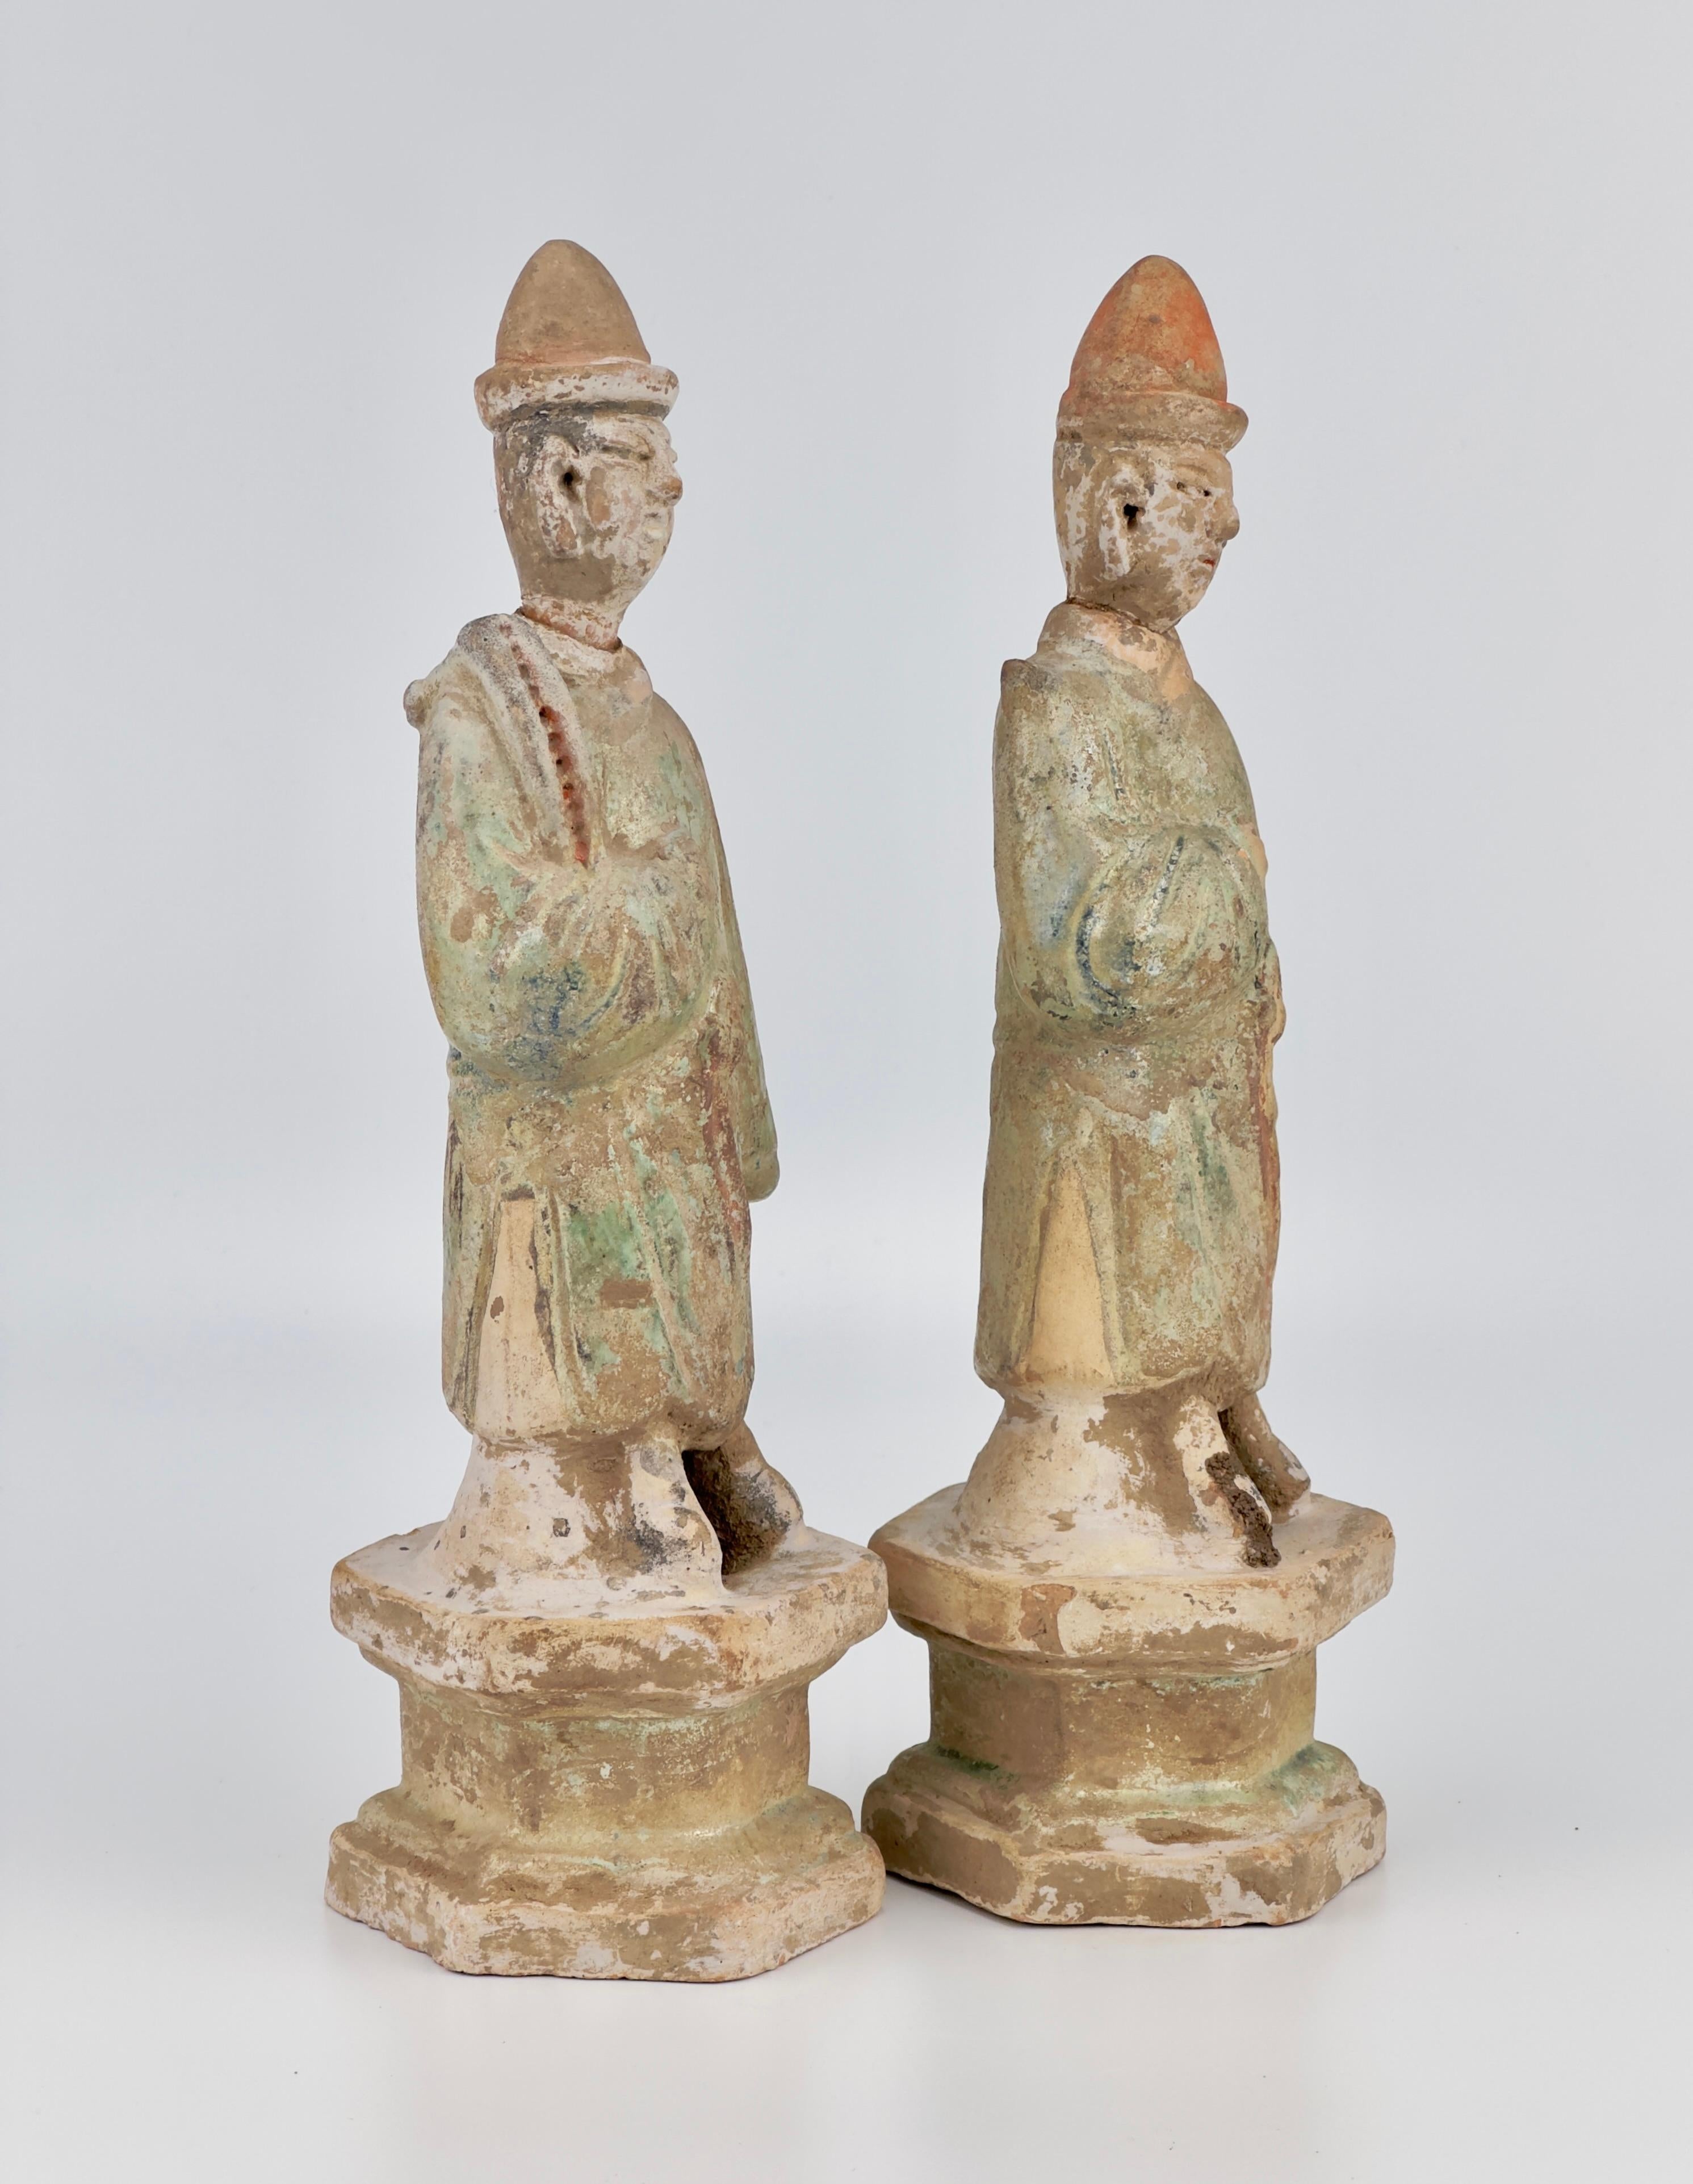 This standing attendant male figure is dressed in a front-closing green robe, cinched at the waist with a sash tied in a knot. Atop his head sits a red hat. He adopts a formal pose on a hexagonal stand, his right hand crossing his chest. The green